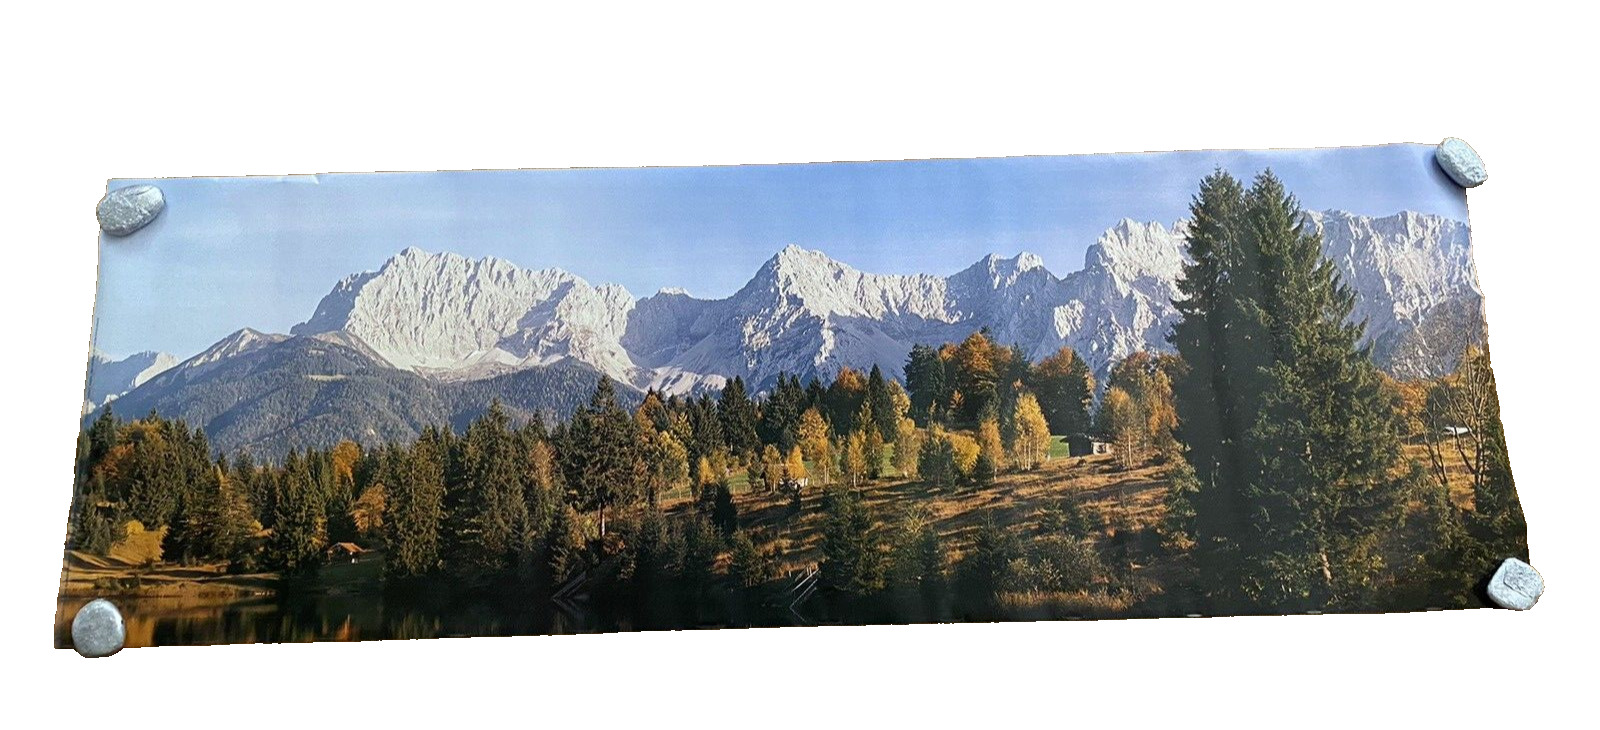 VERKERKE Penant LakeView Majestic Snow Capped Mountain Oversized Poster 1982